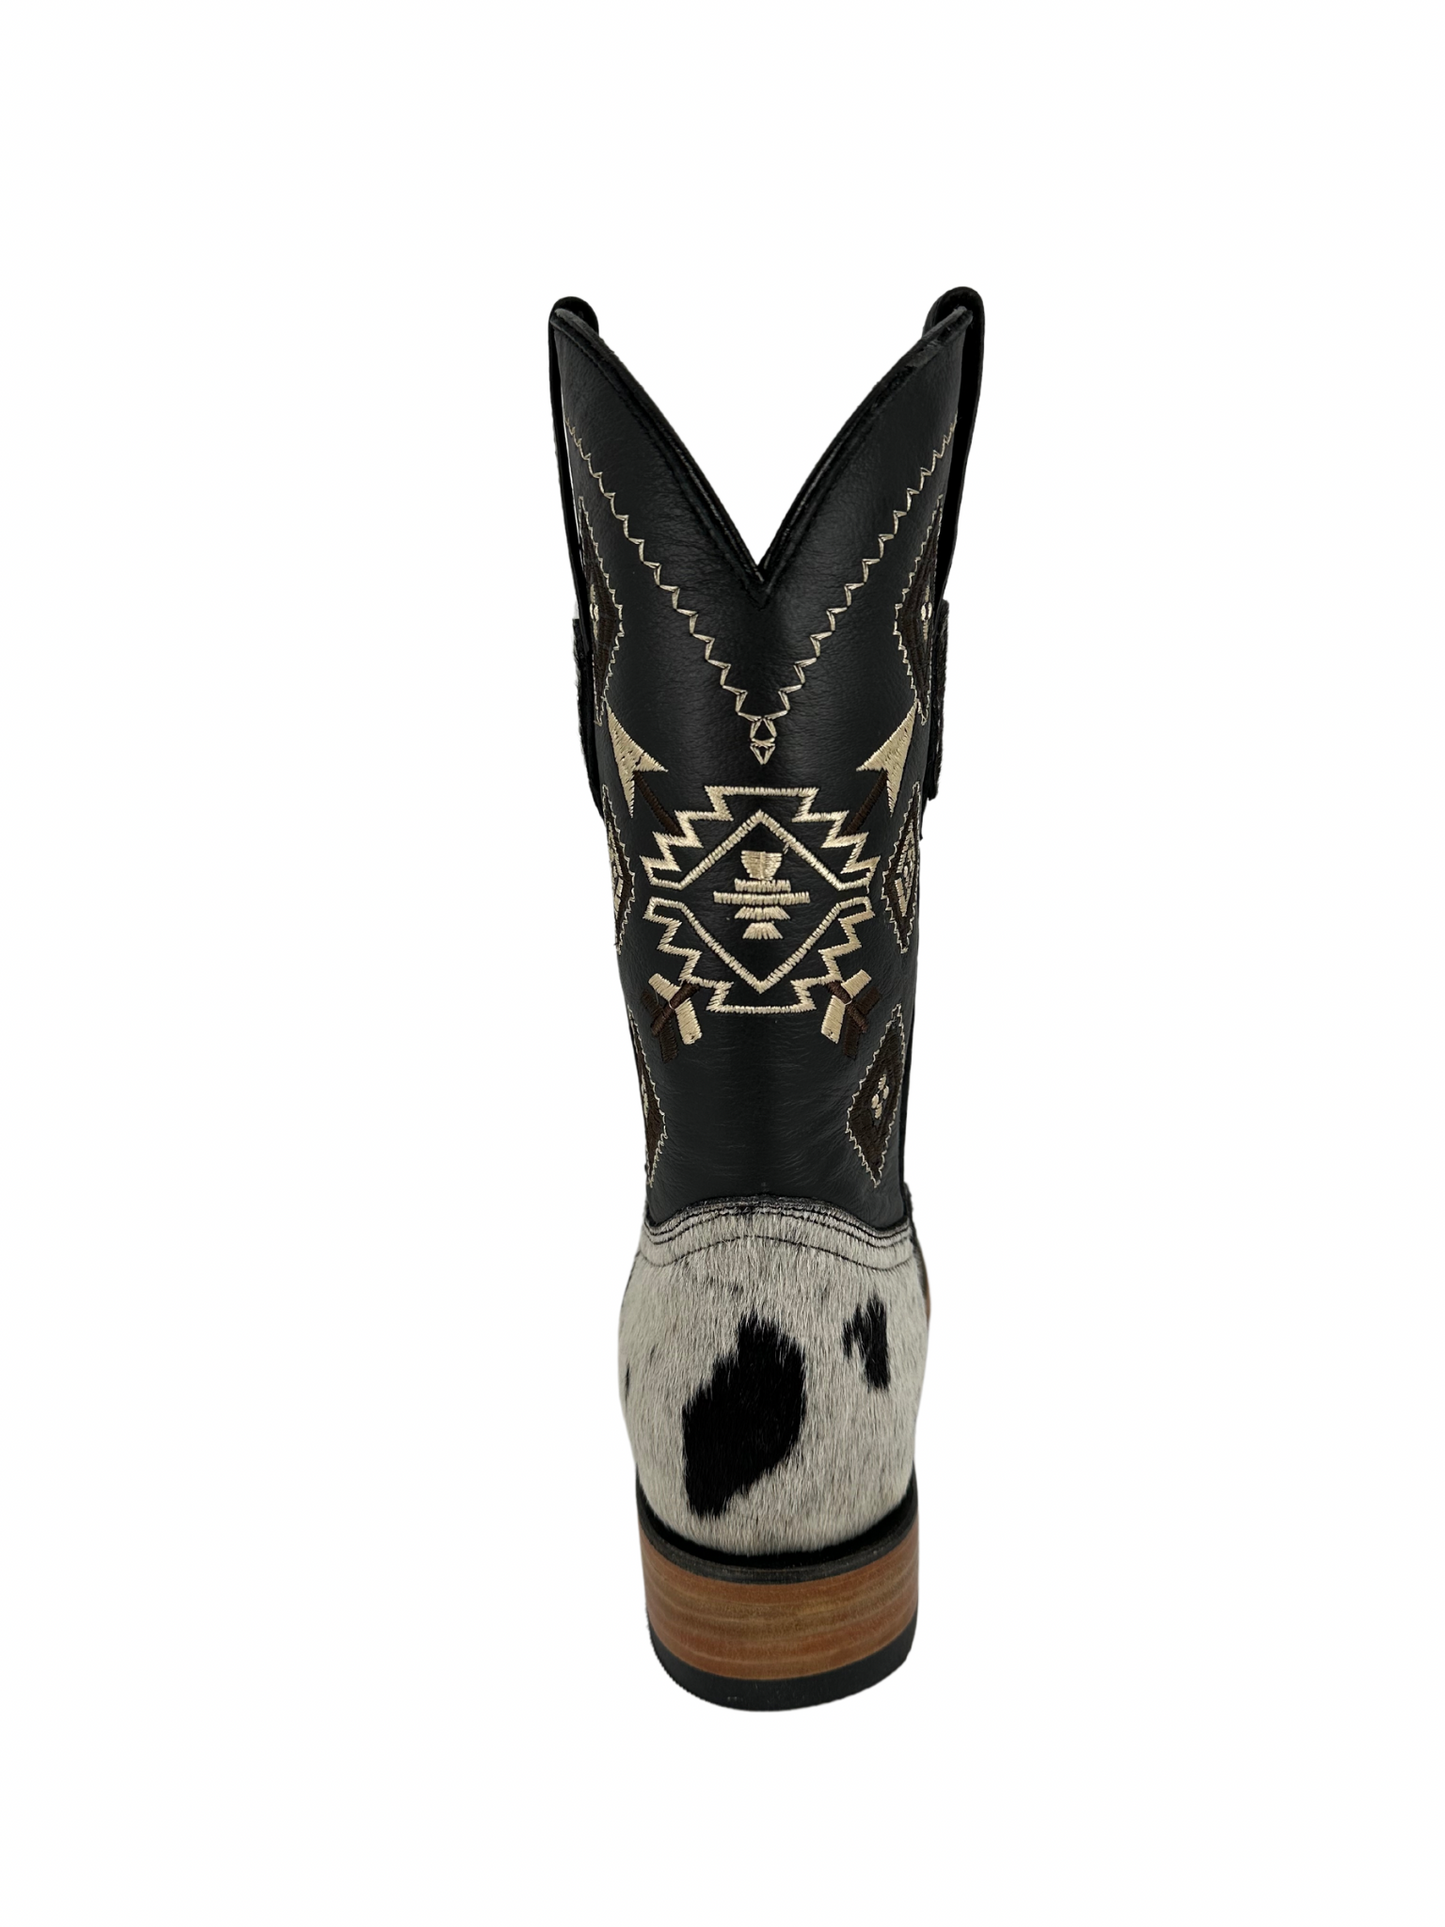 Rock'em Men's Cow Hair Boots Size 7.5 *AS SEEN ON IMAGE*